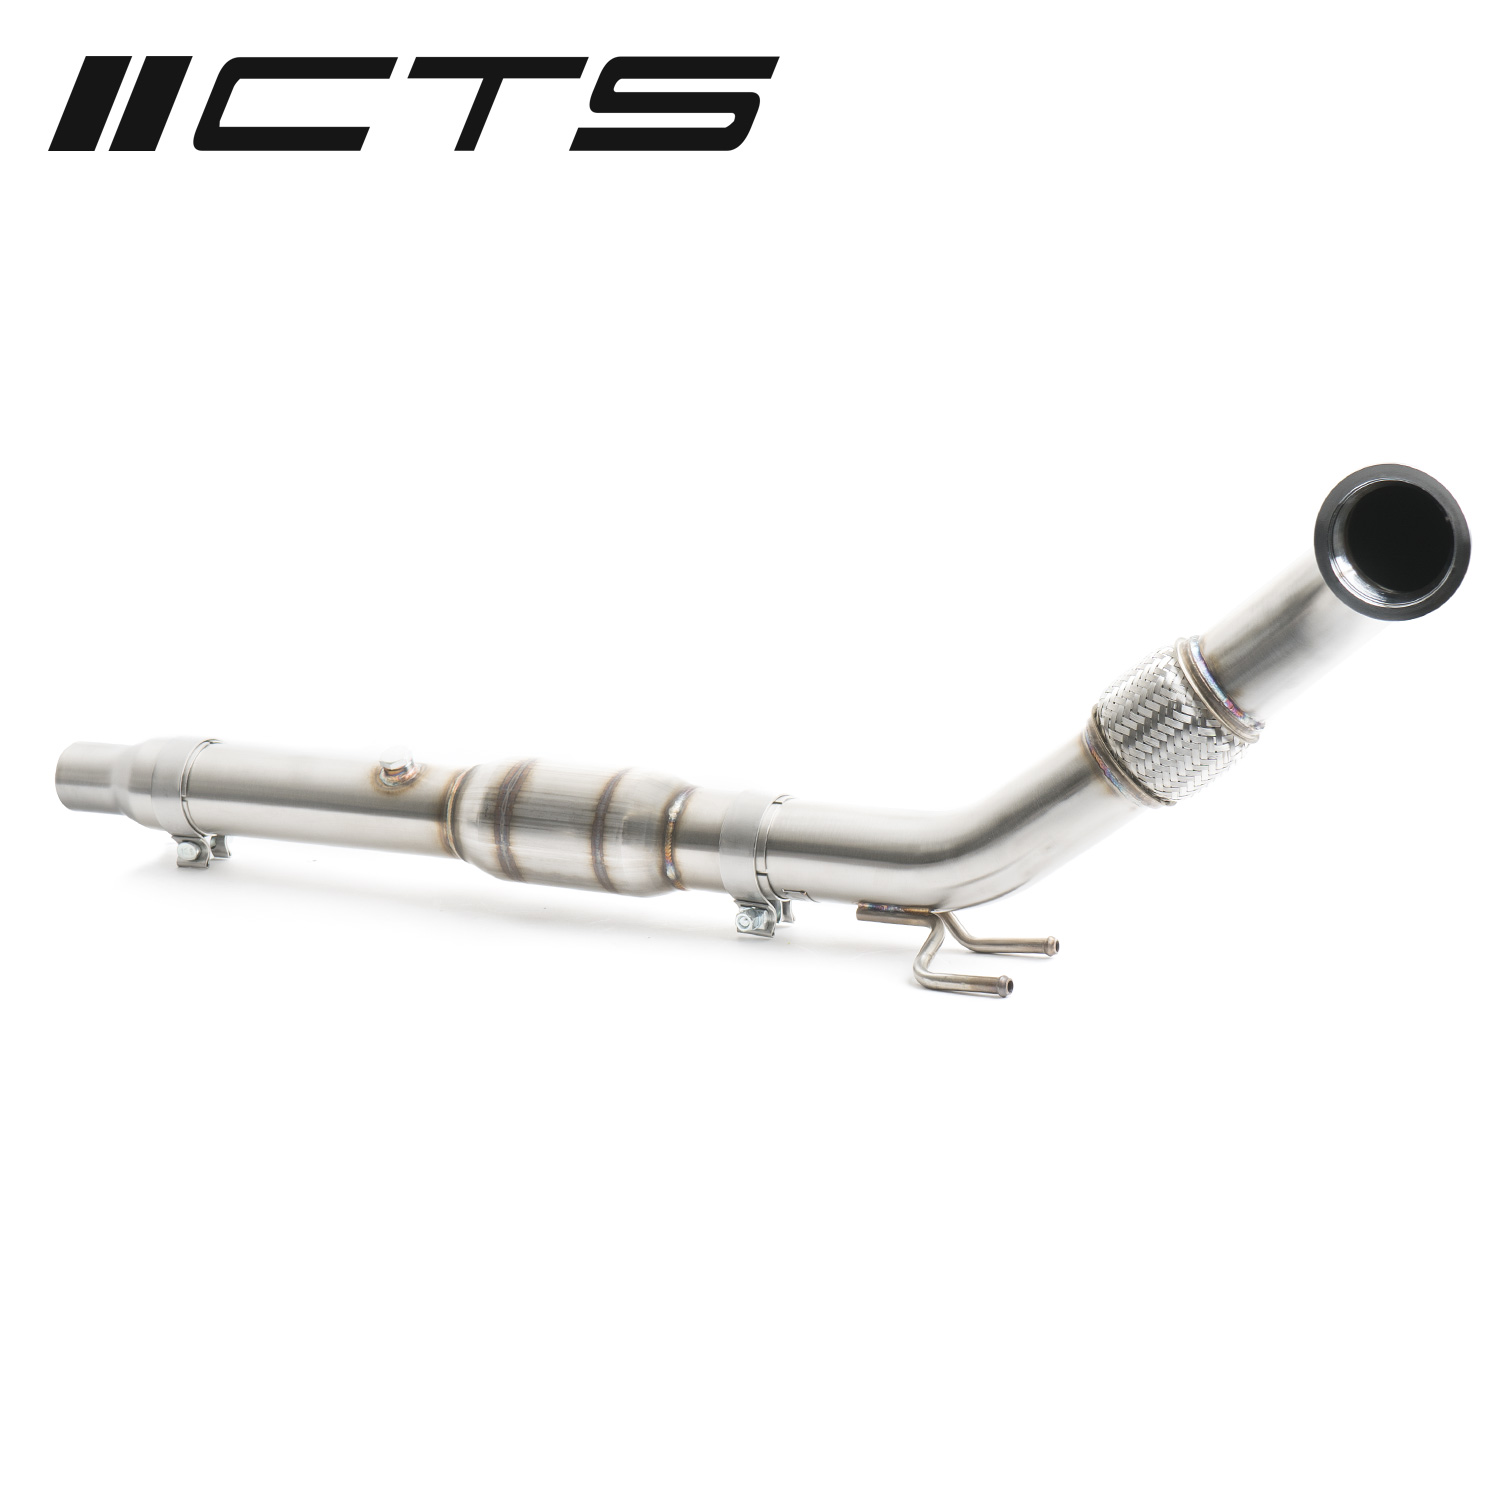 Fs Cts Turbo Gen3 1 8t 2 0t Tsi Downpipe With High Flow Cat Vw